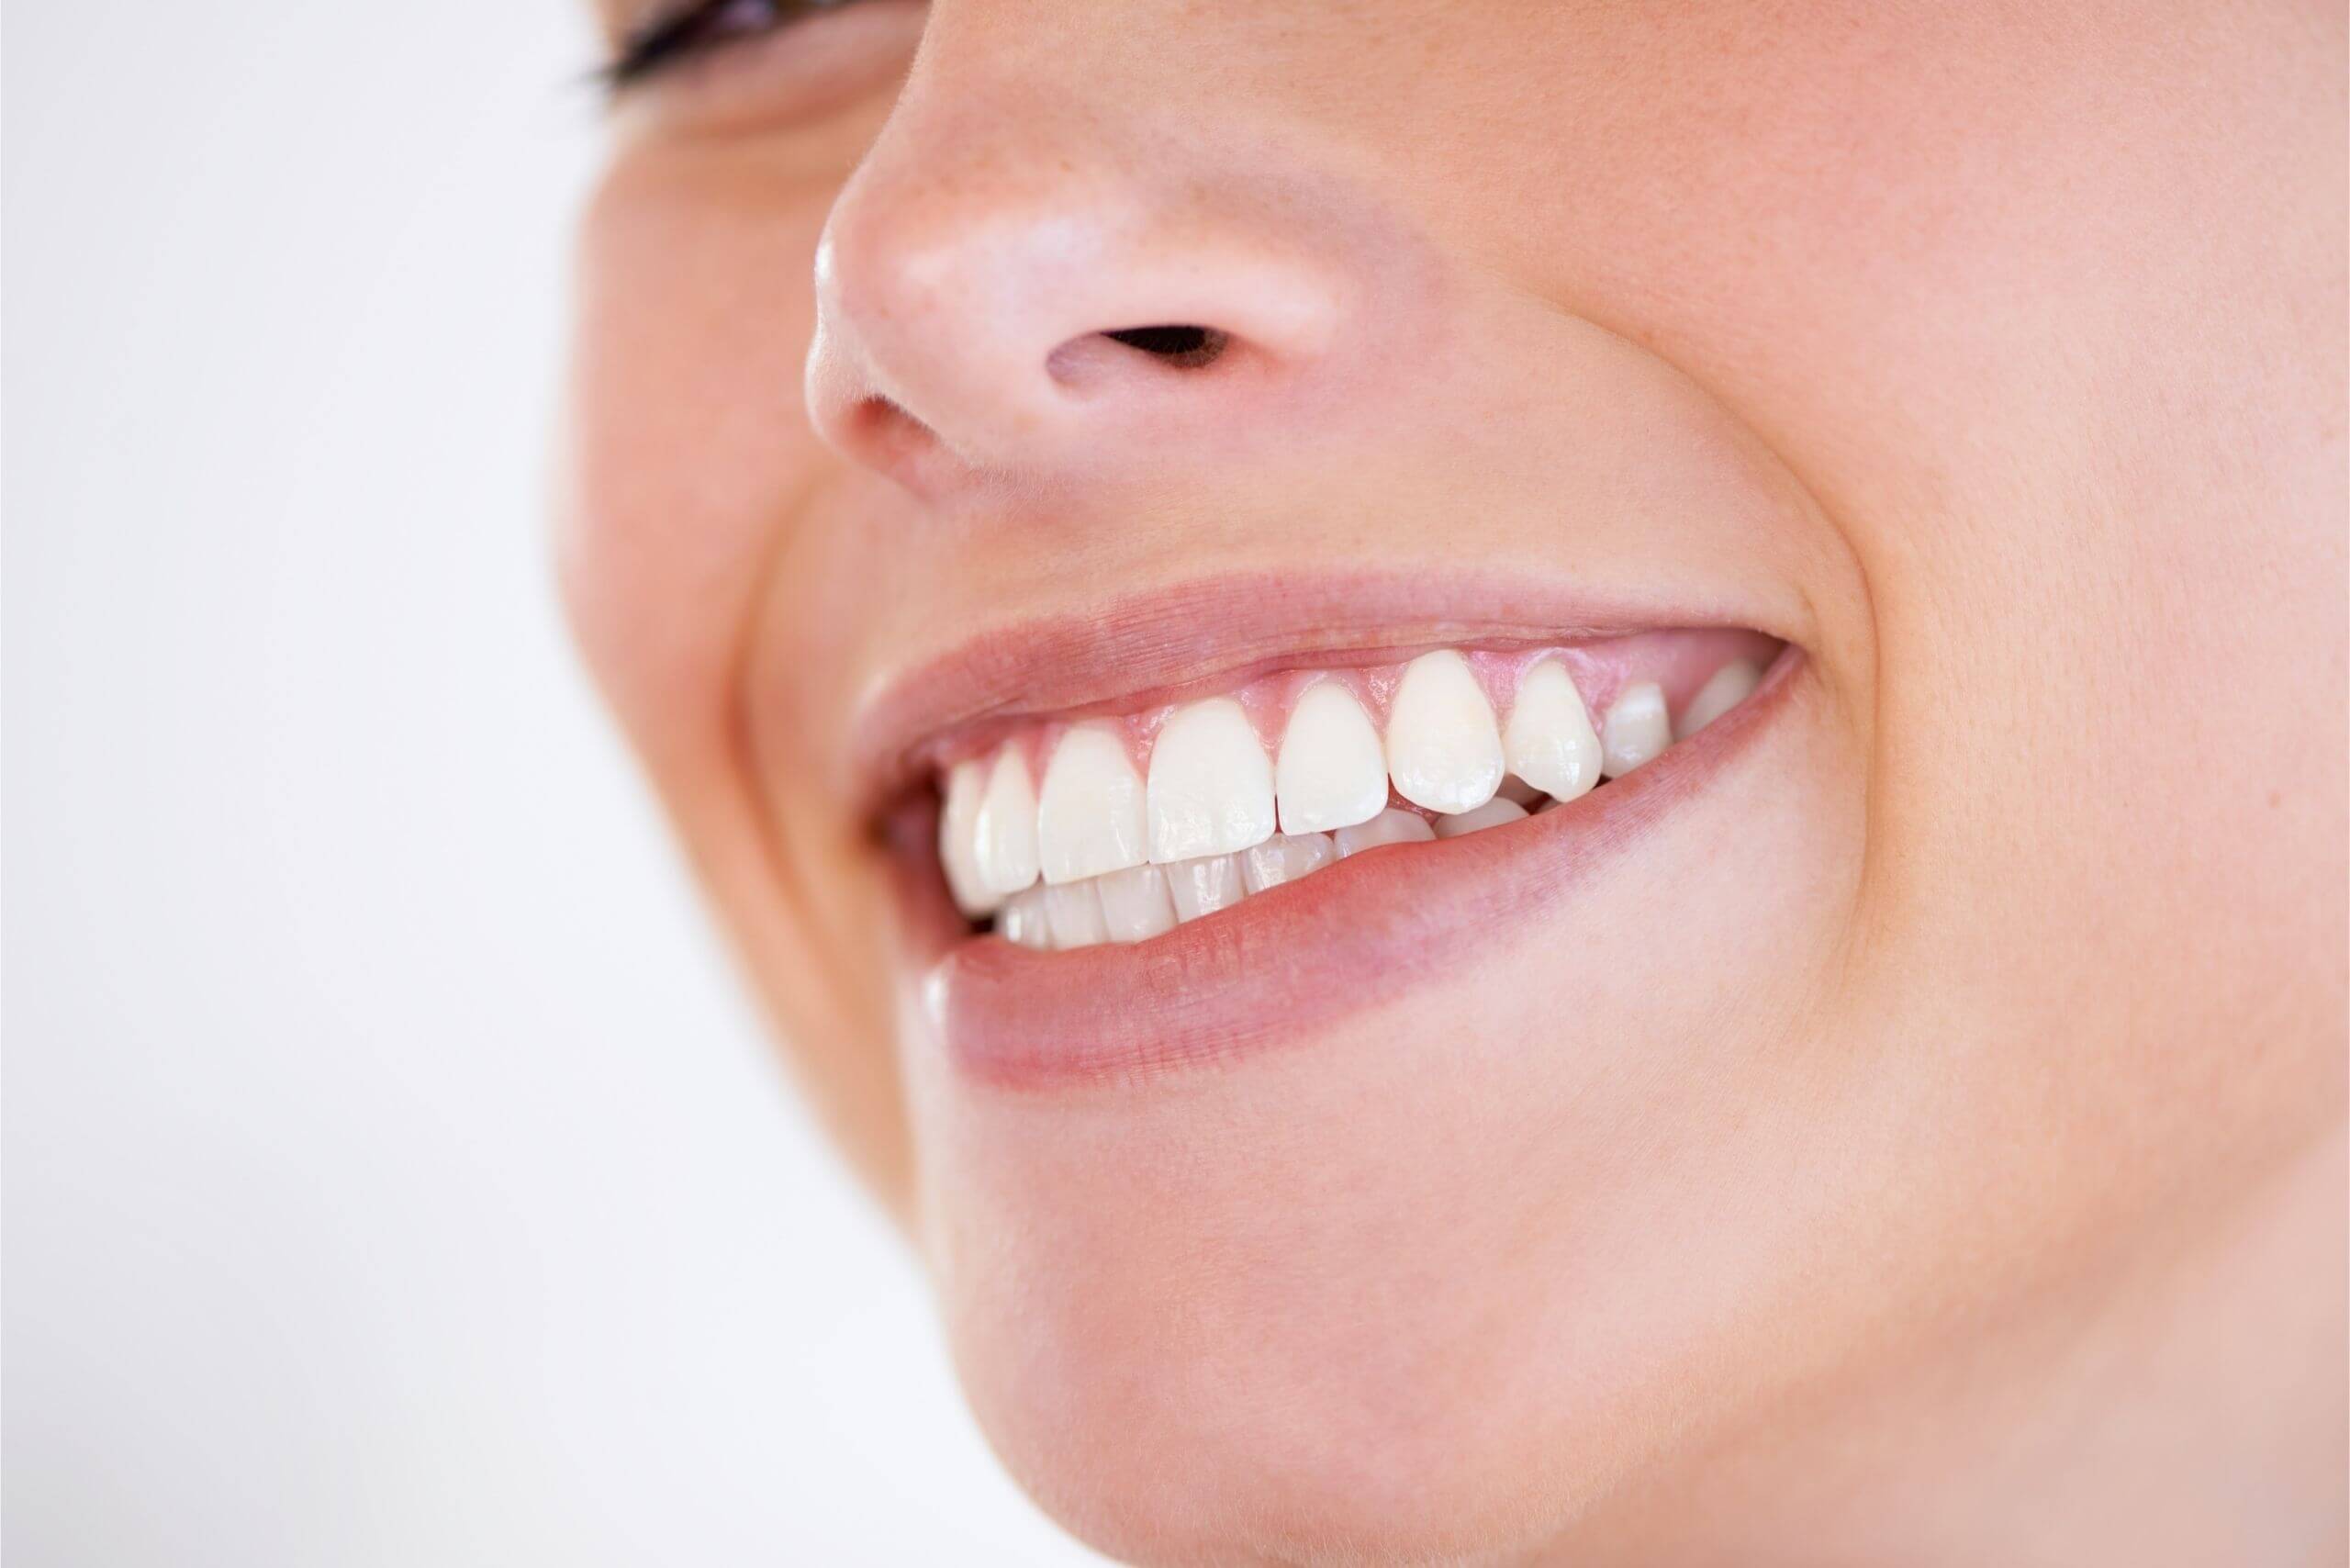 Woman with gum disease at our dental practice in Maidstone, Kent